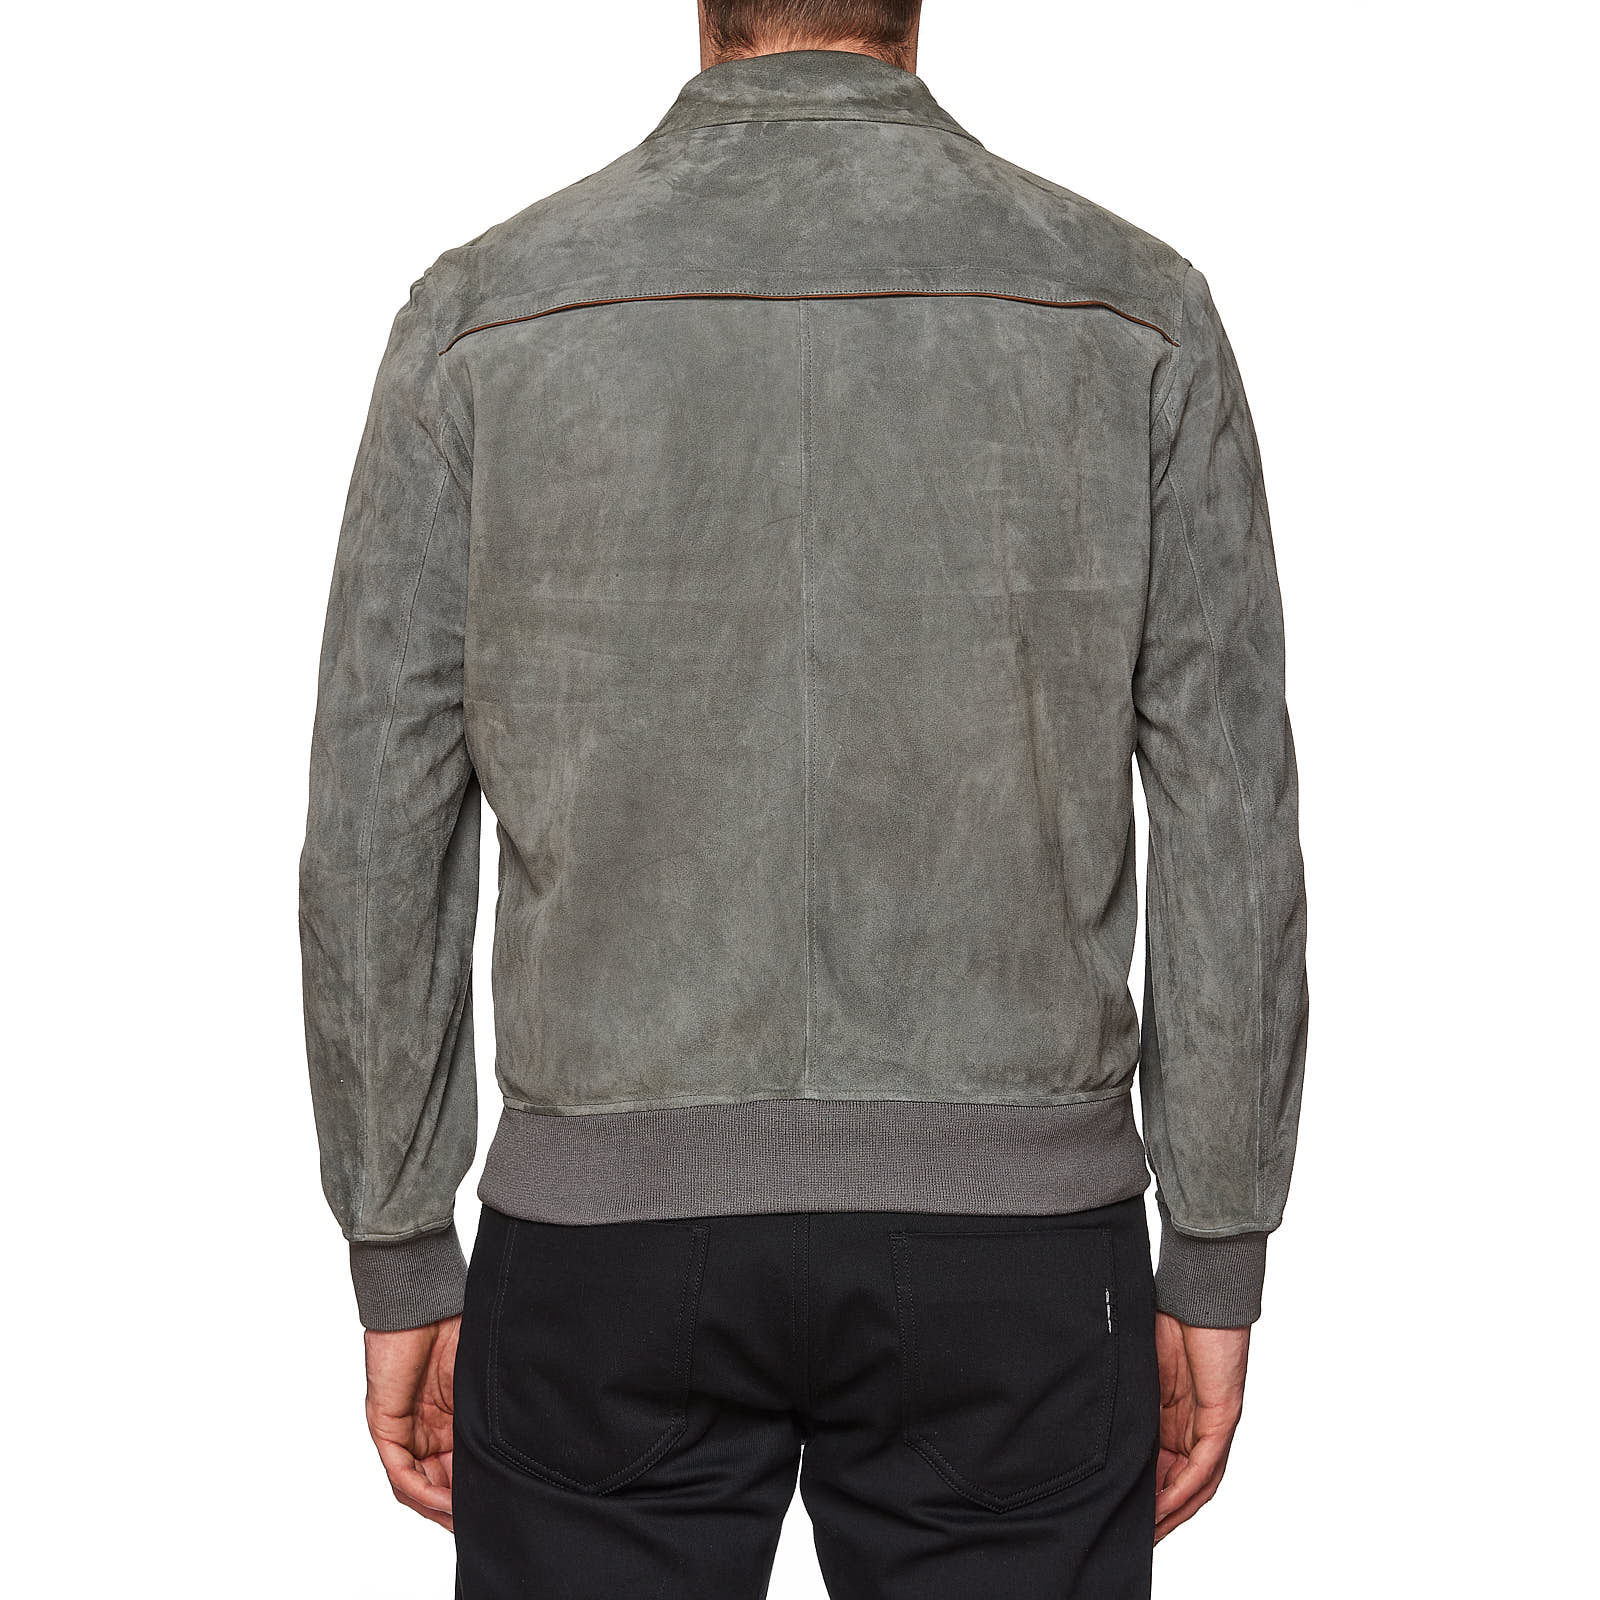 SERAPHIN Gray Goat Suede Leather Unlined Bomber Jacket FR 48 US M SERAPHIN